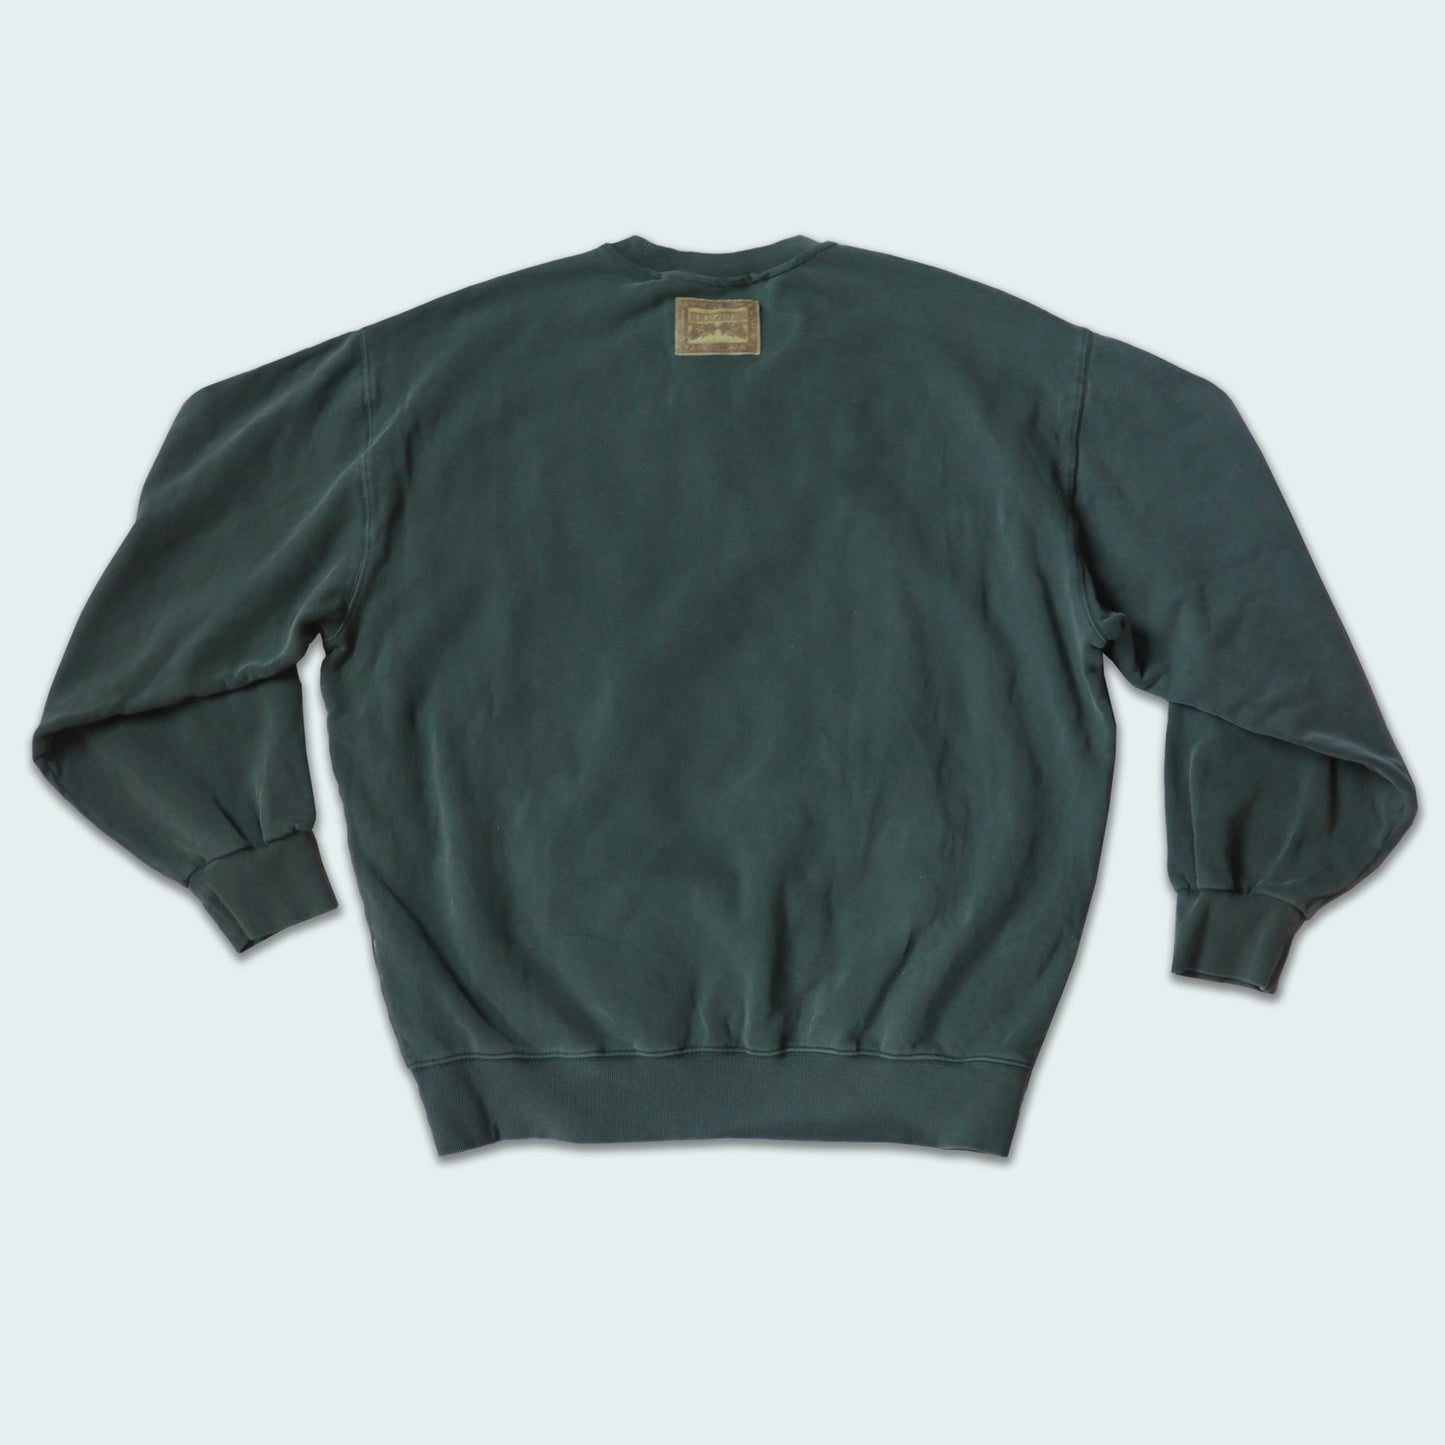 "WHAT DO YOU SEE?" CREW NECK - FOREST